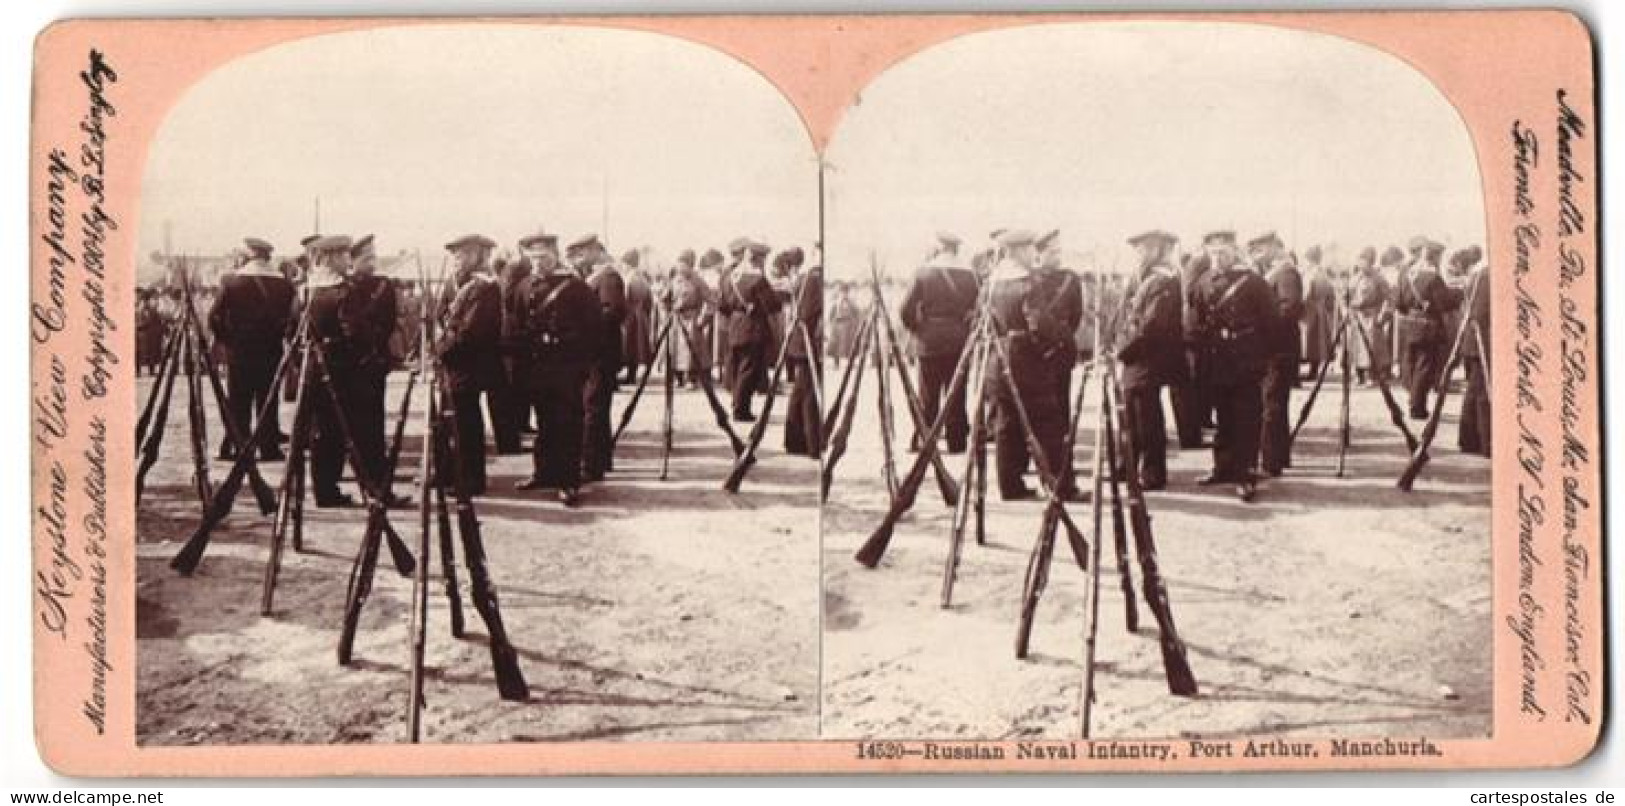 Stereo-Fotografie Keystone View Company, Meadville /Pa, Ansicht Port Arthur /Manchuria, Russian Naval Infantry  - Stereoscoop